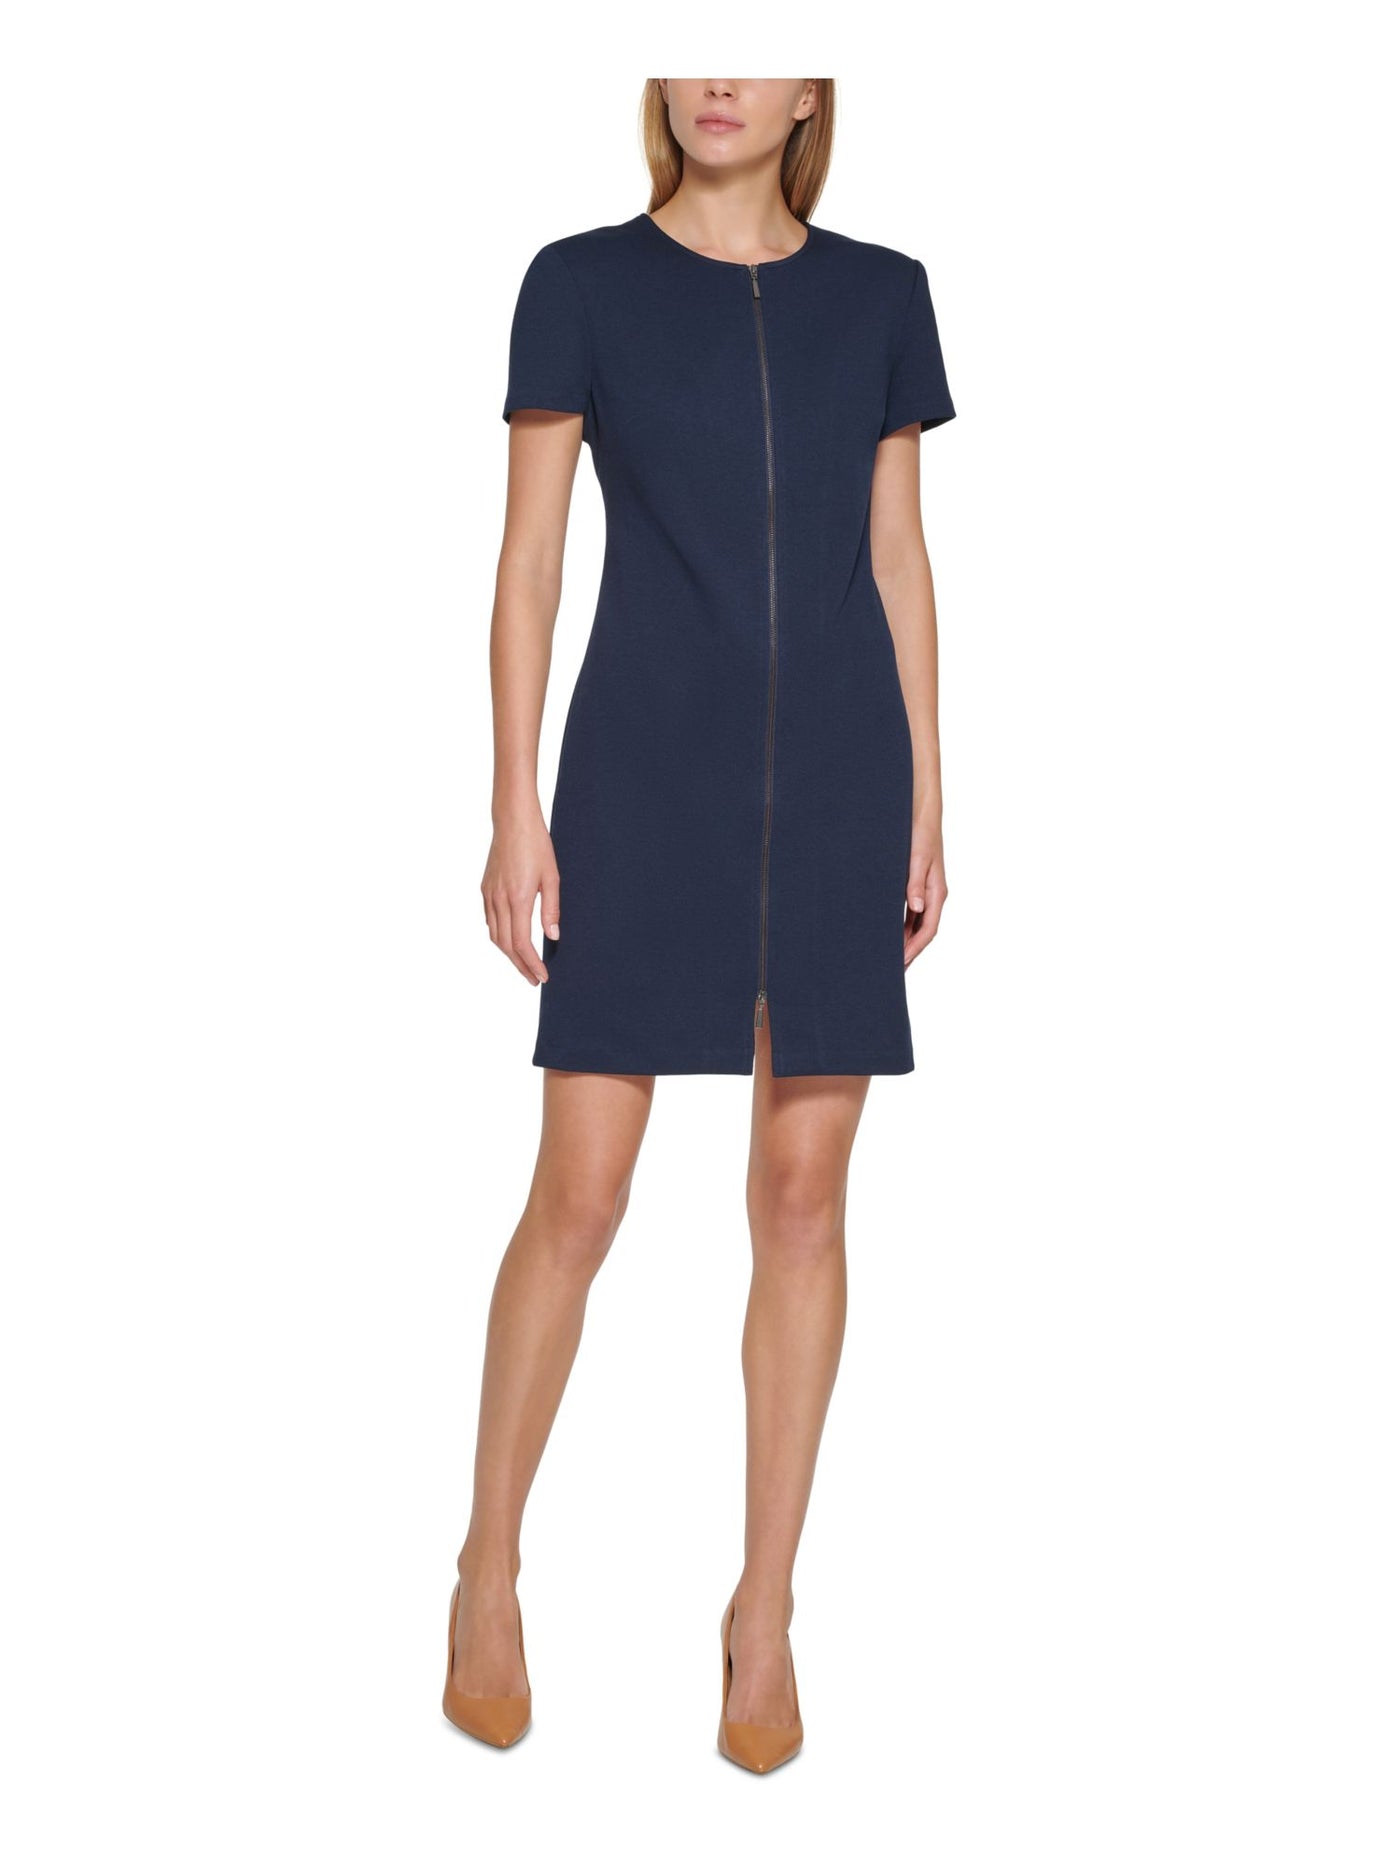 CALVIN KLEIN Womens Stretch Zippered Shoulder Pads Short Sleeve Jewel Neck Above The Knee Party Sheath Dress